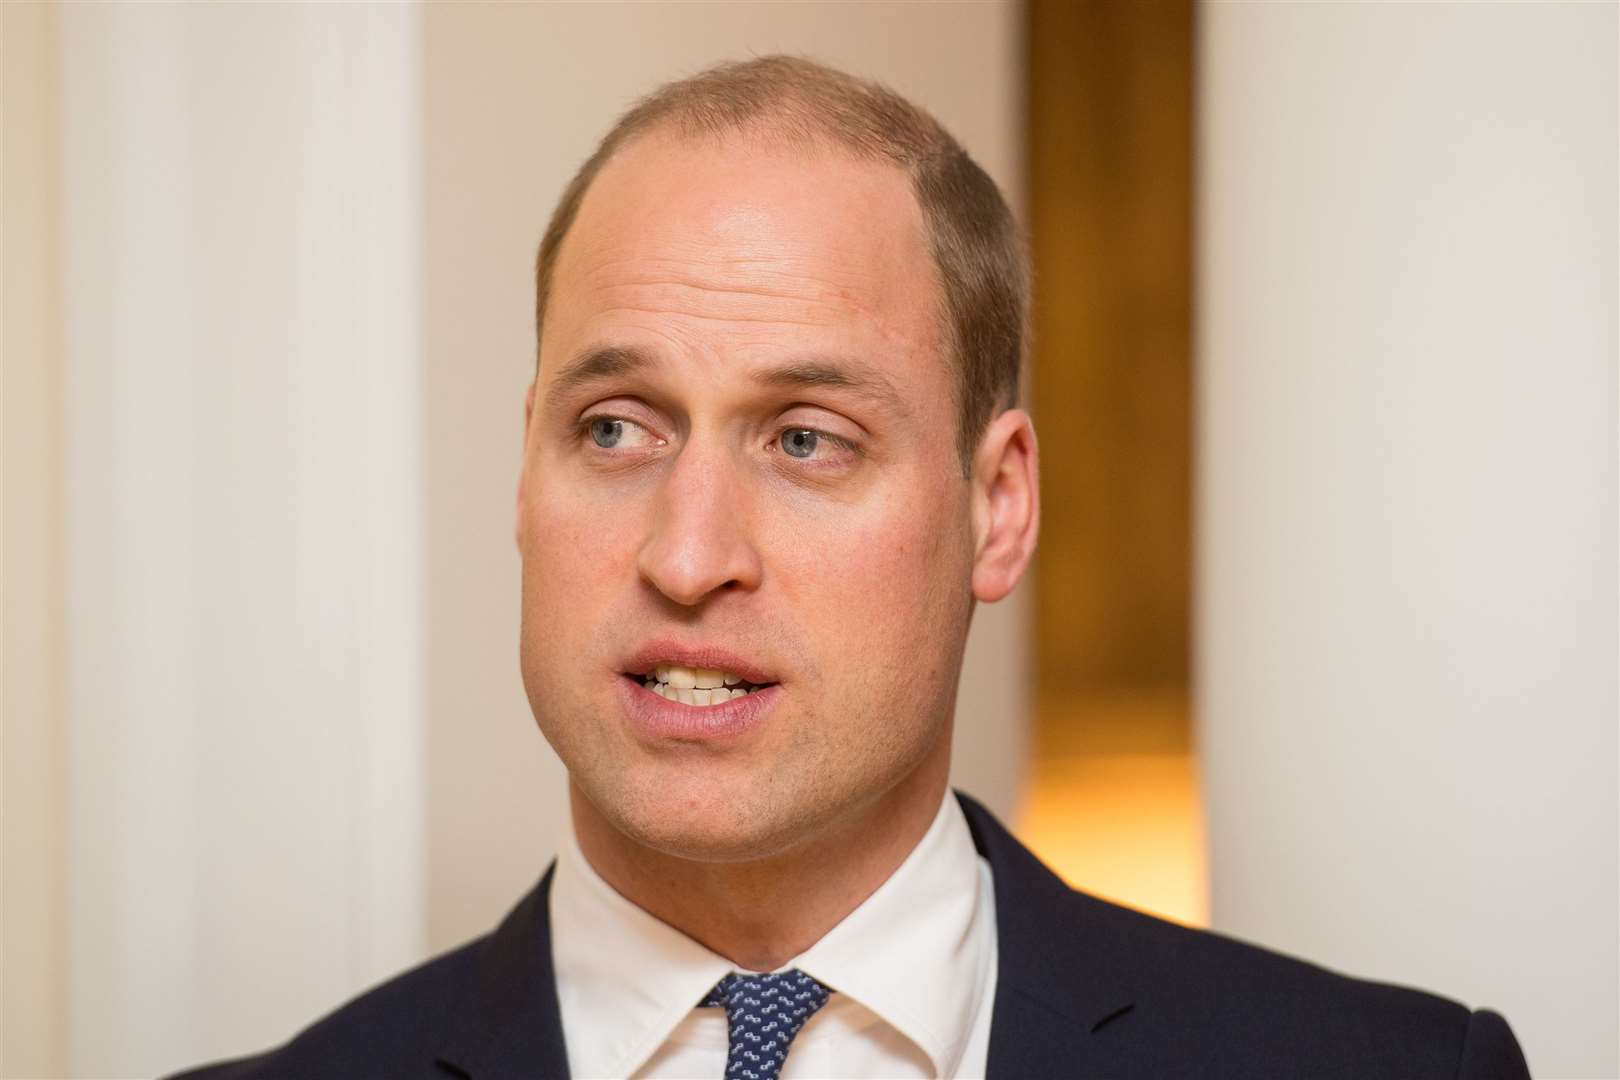 William is likely to be without his private secretary until the coronavirus outbreak is well under control (Dominic Lipinski/PA Wire)